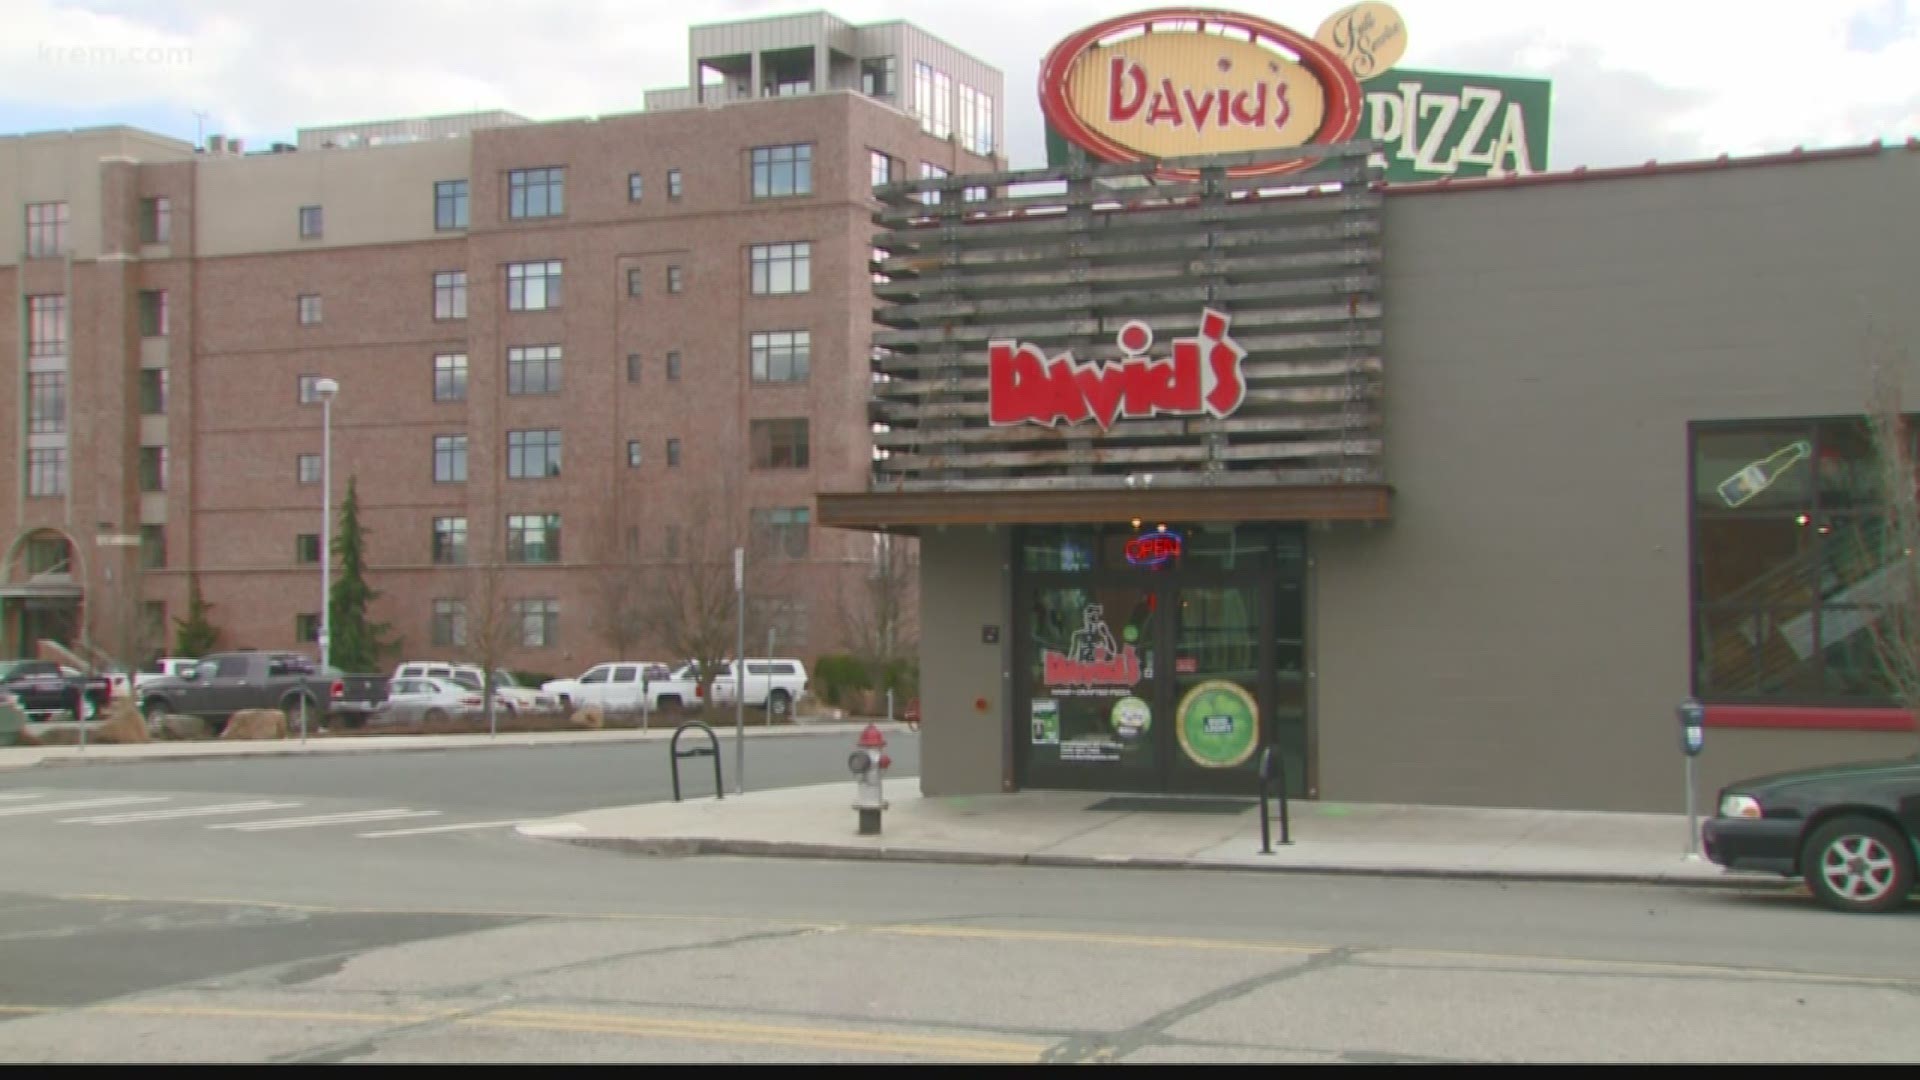 Owner of David's Pizza, Mark Starr, said he was really looking forward to the event and so were his customers.